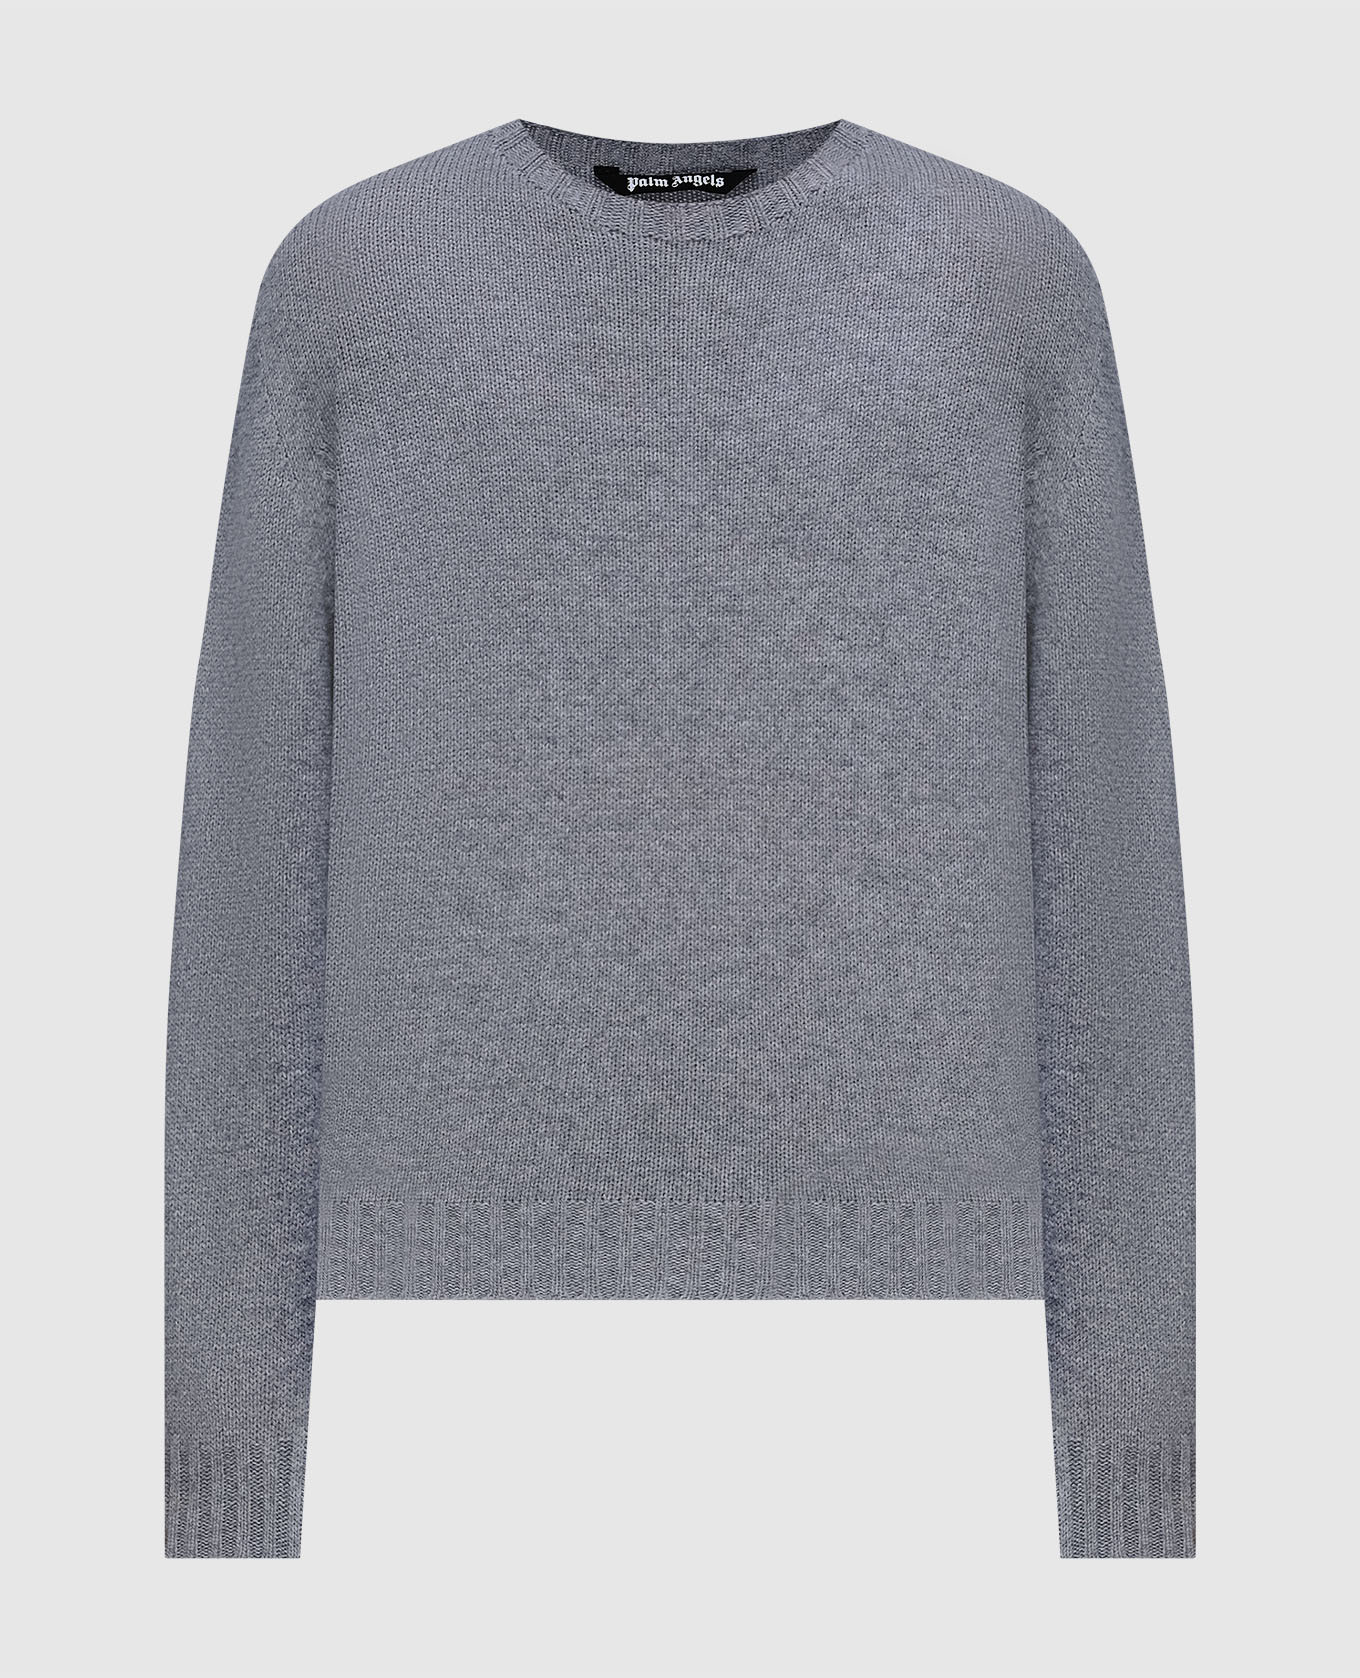 Gray wool sweater with logo embroidery